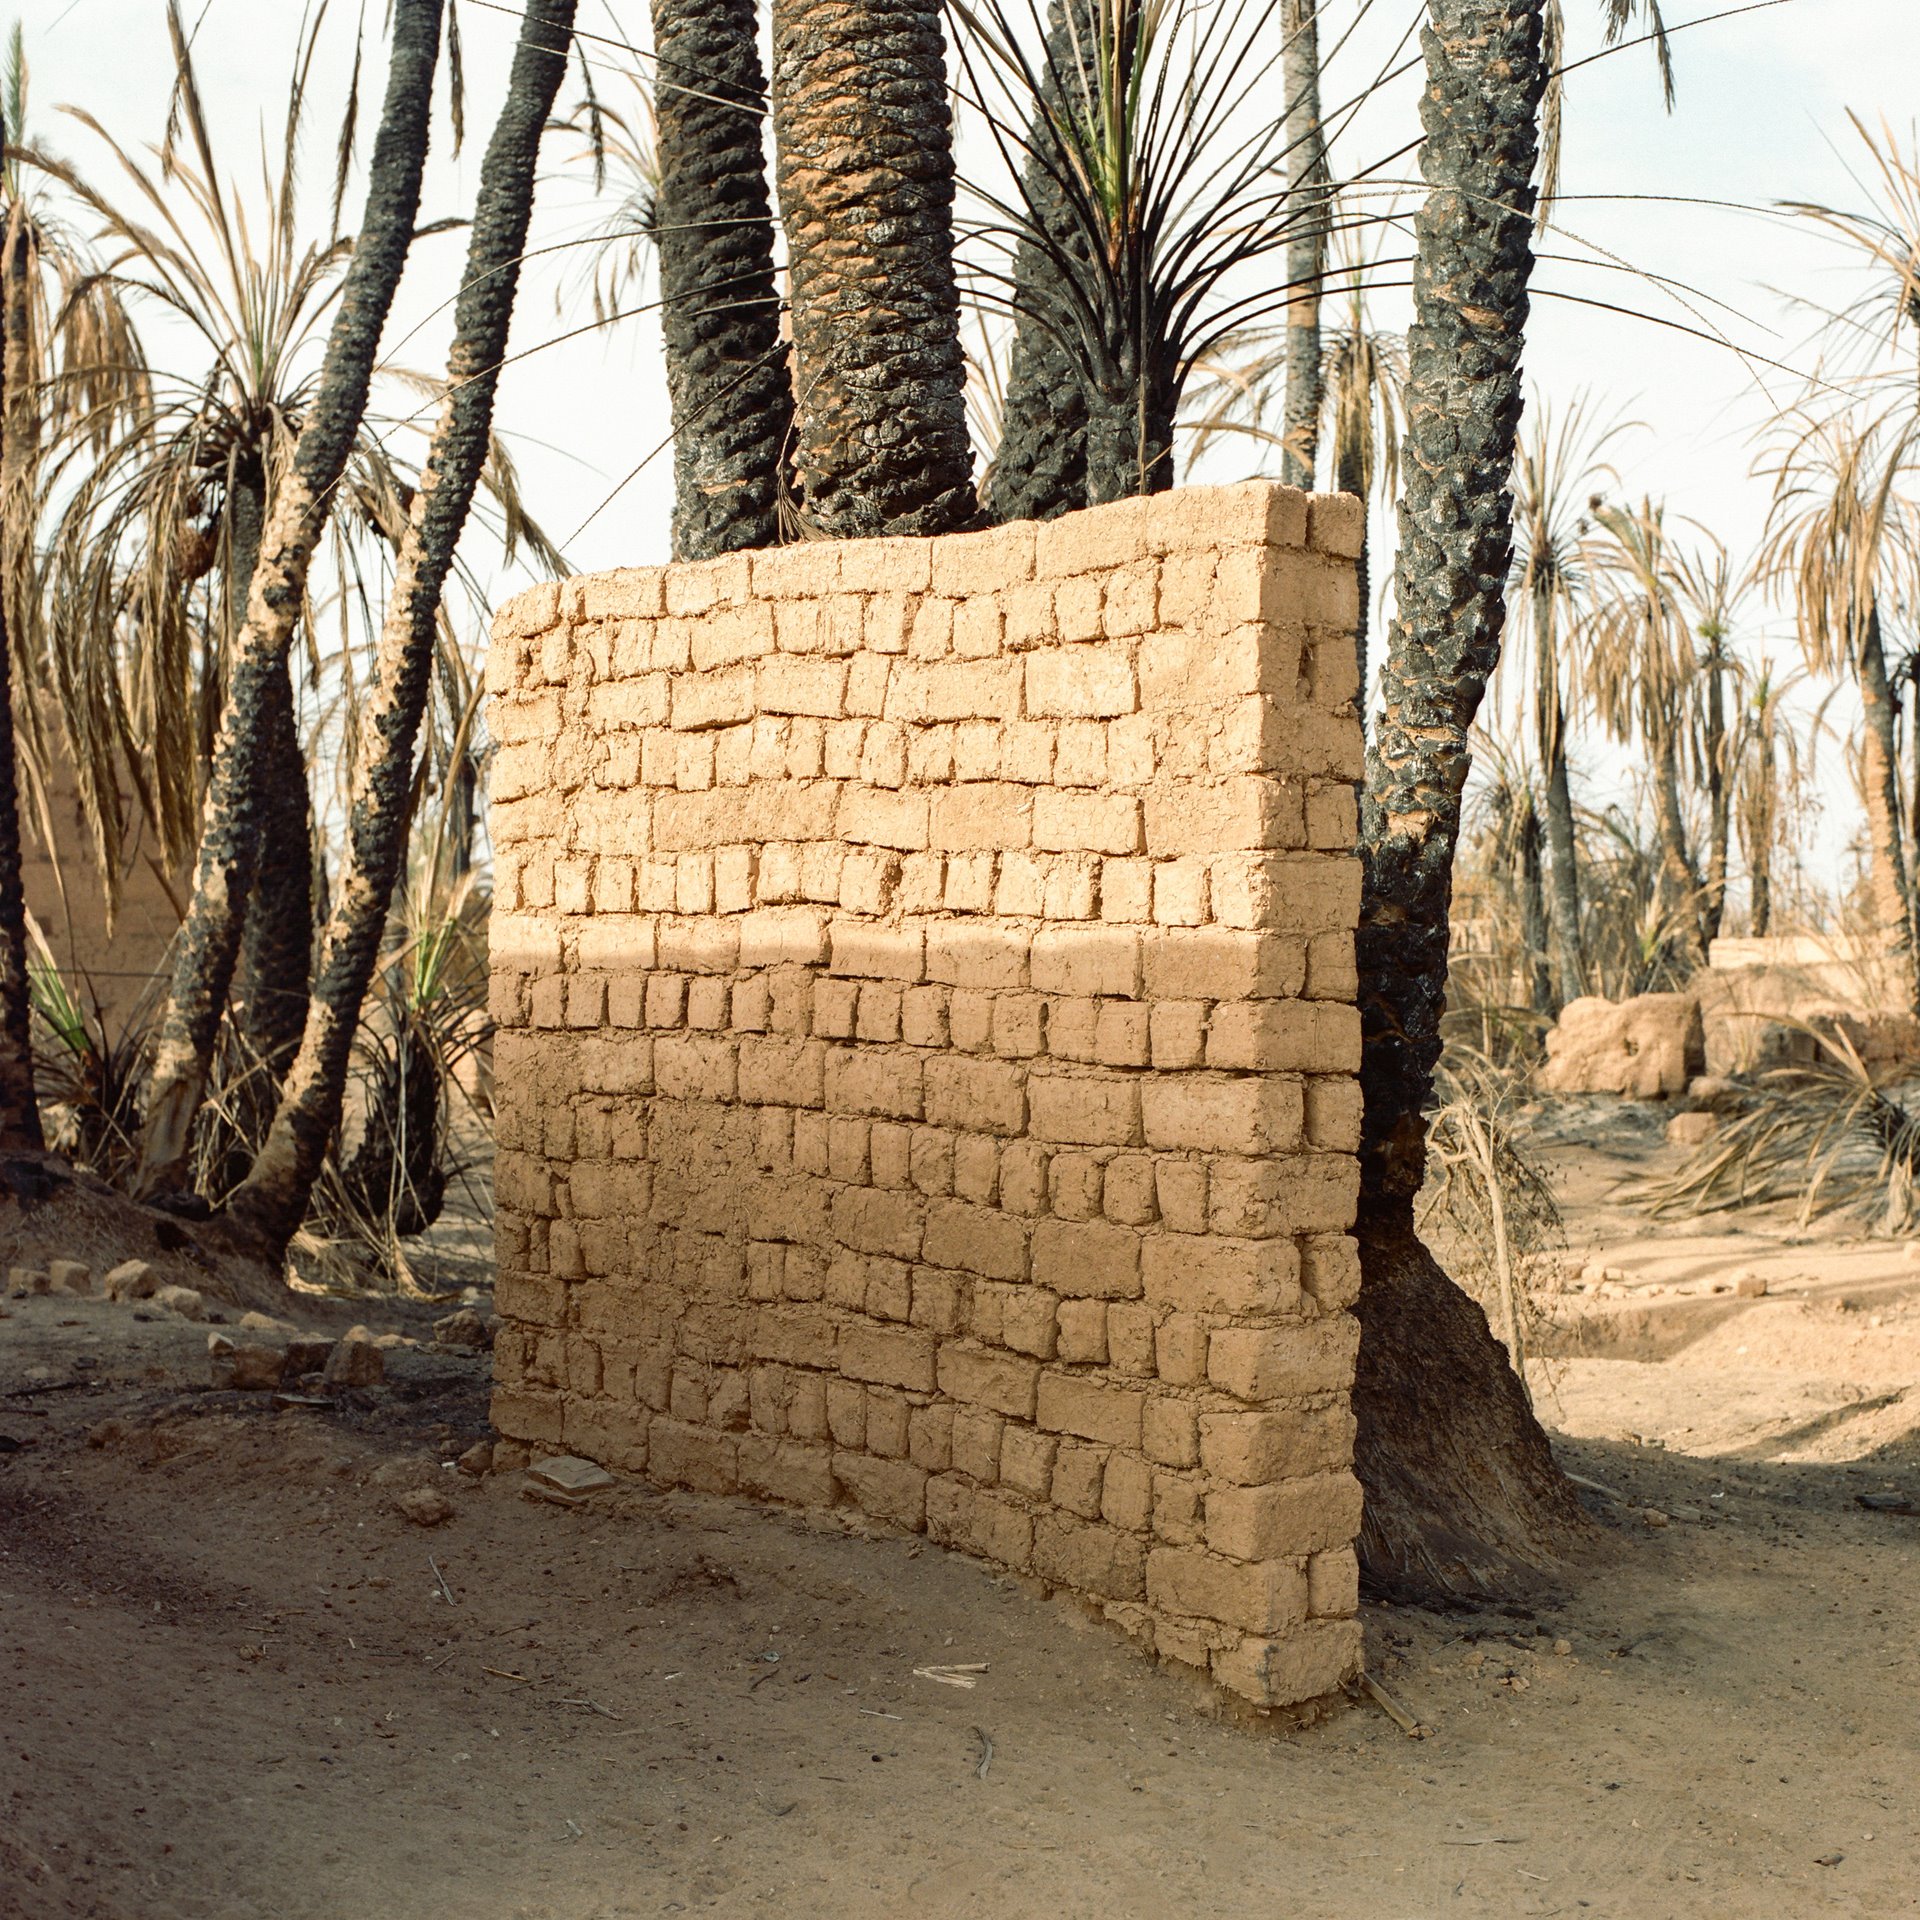 A <em>pisé </em>(rammed-earth) wall stands between palms in Tighmert Oasis, in southern Morocco. The ancient pisé technique is falling into disuse, as nowadays people prefer to use concrete blocks.